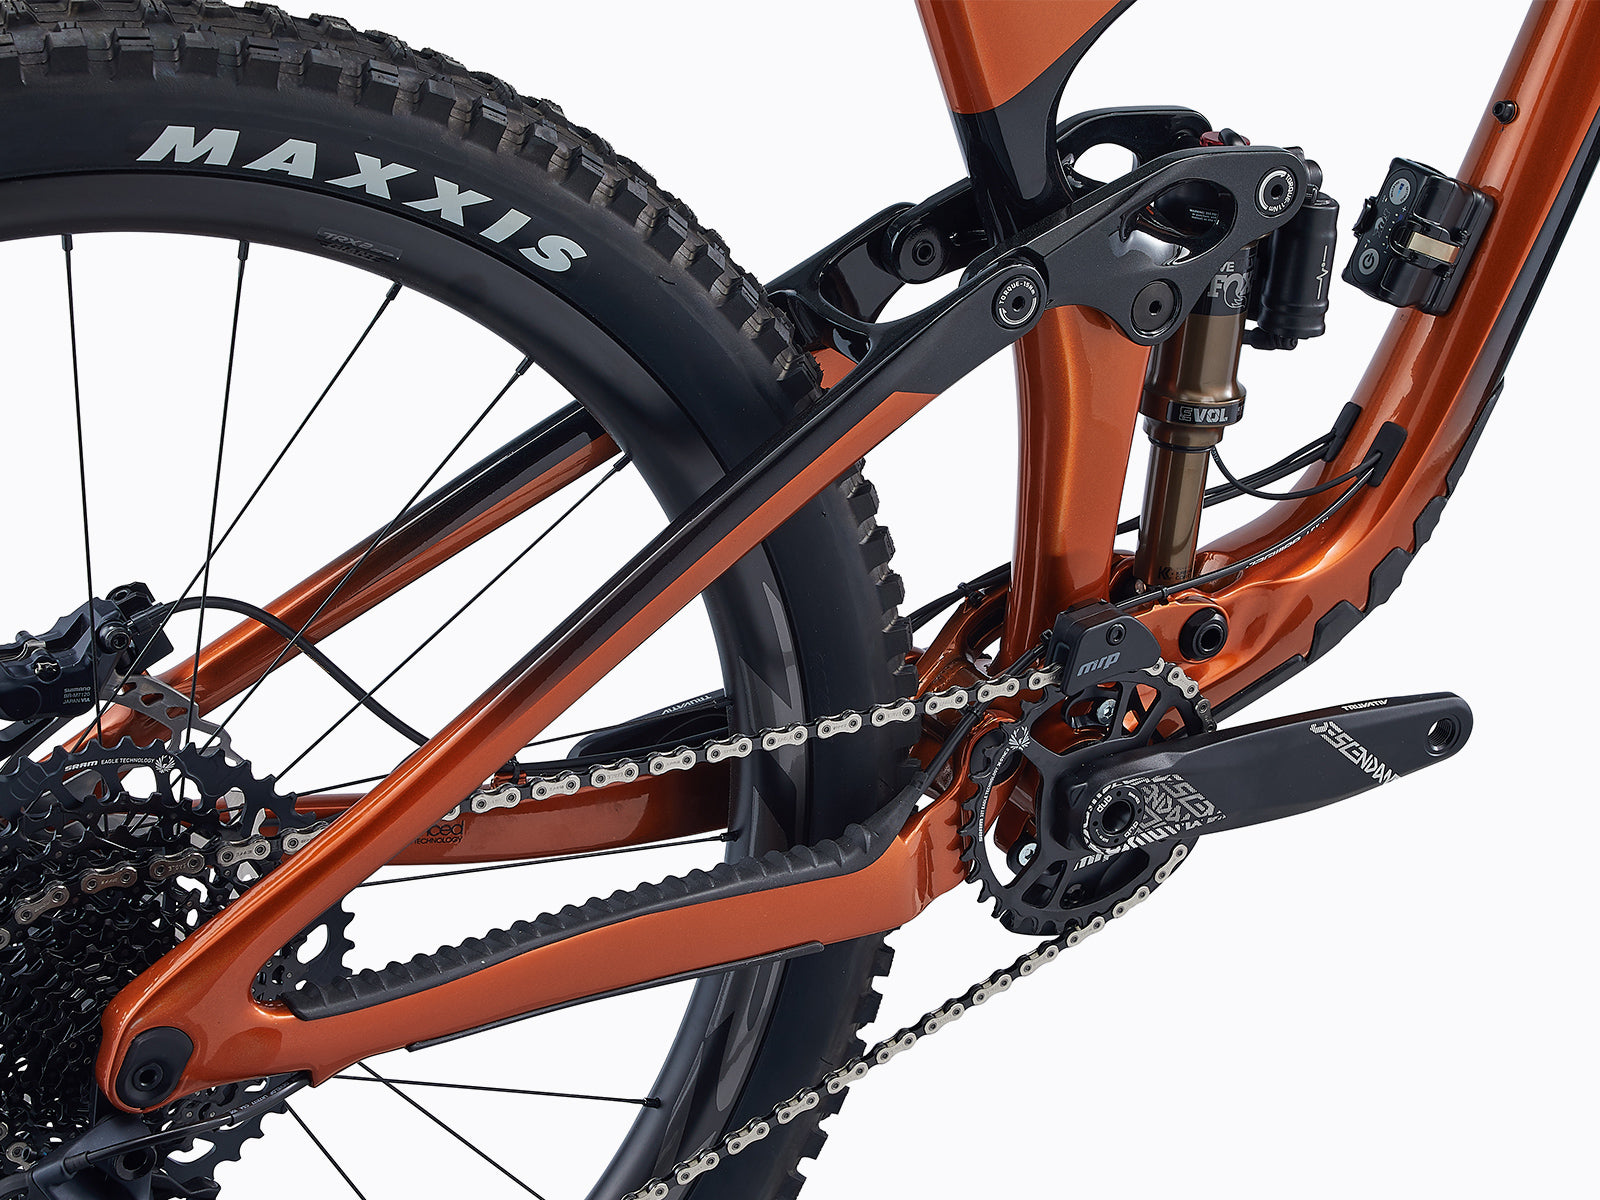 Image shows, giant reign advanced pro 29 1, a full suspension mountain bike from Giant now sold at Giant Melbourne